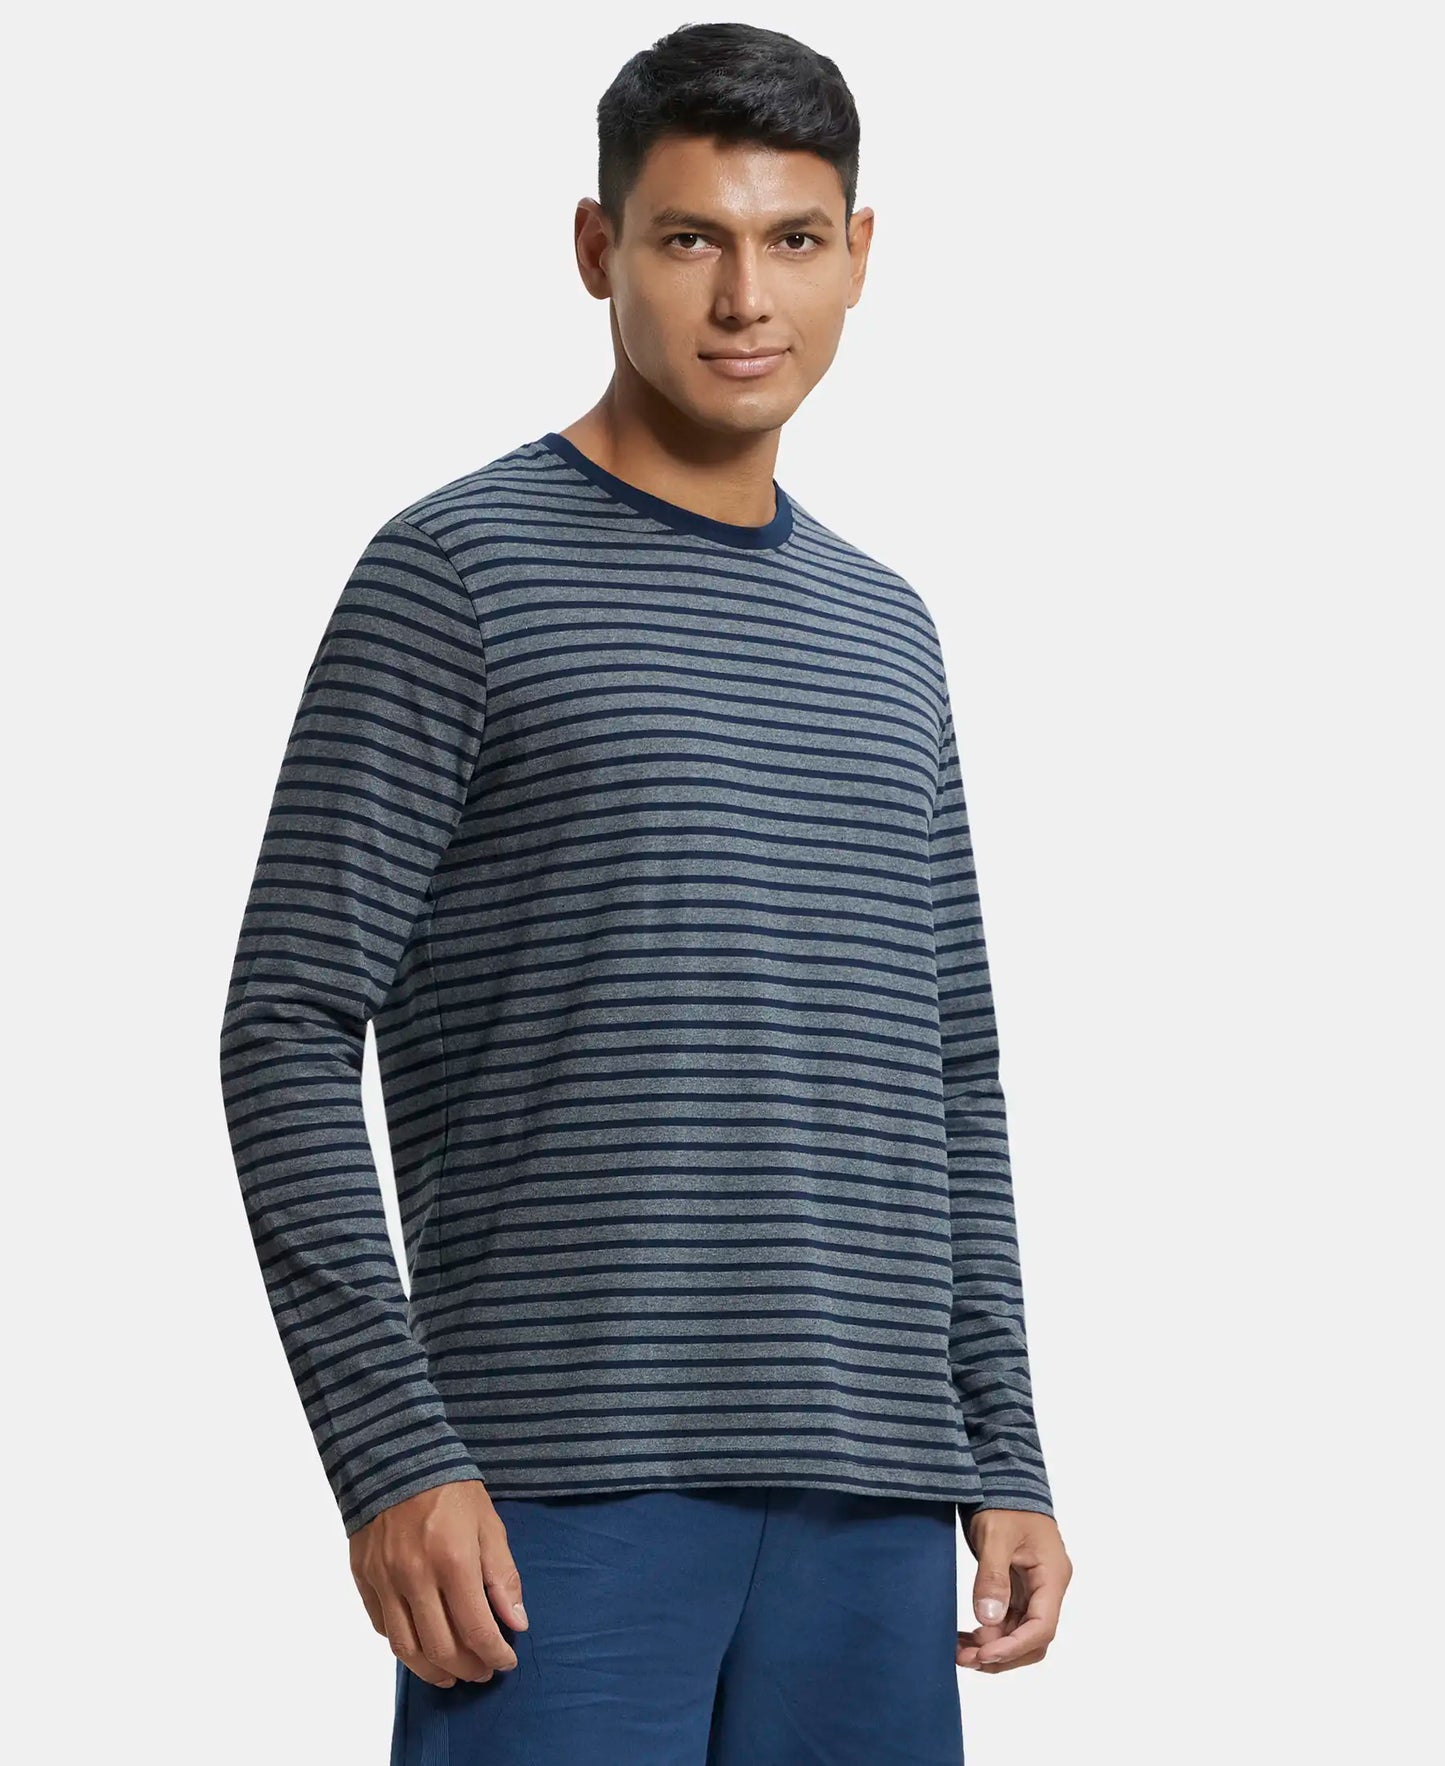 Super Combed Cotton Rich Striped Round Neck Full Sleeve T-Shirt - Charcoal & Navy-2